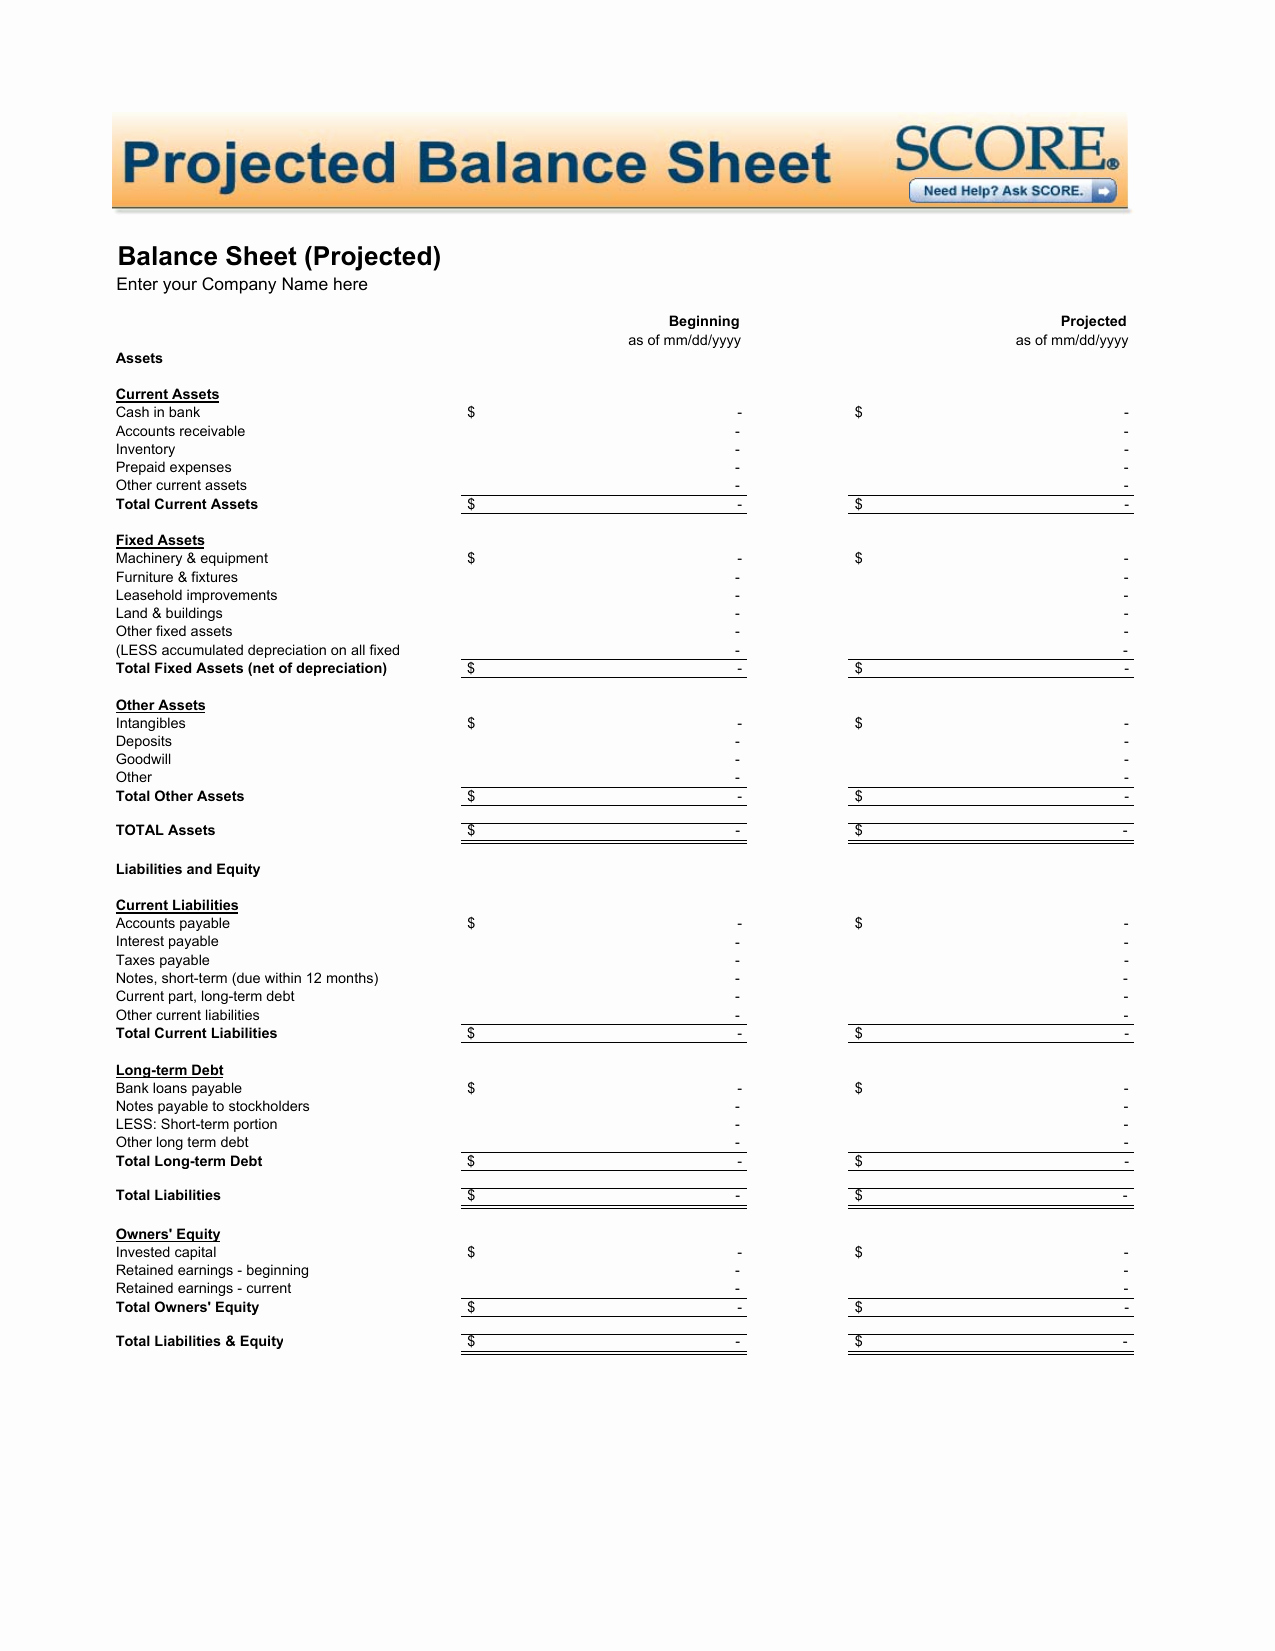 Llc Capital Account Spreadsheet Awesome Download Projected Balance Sheet Template Excel